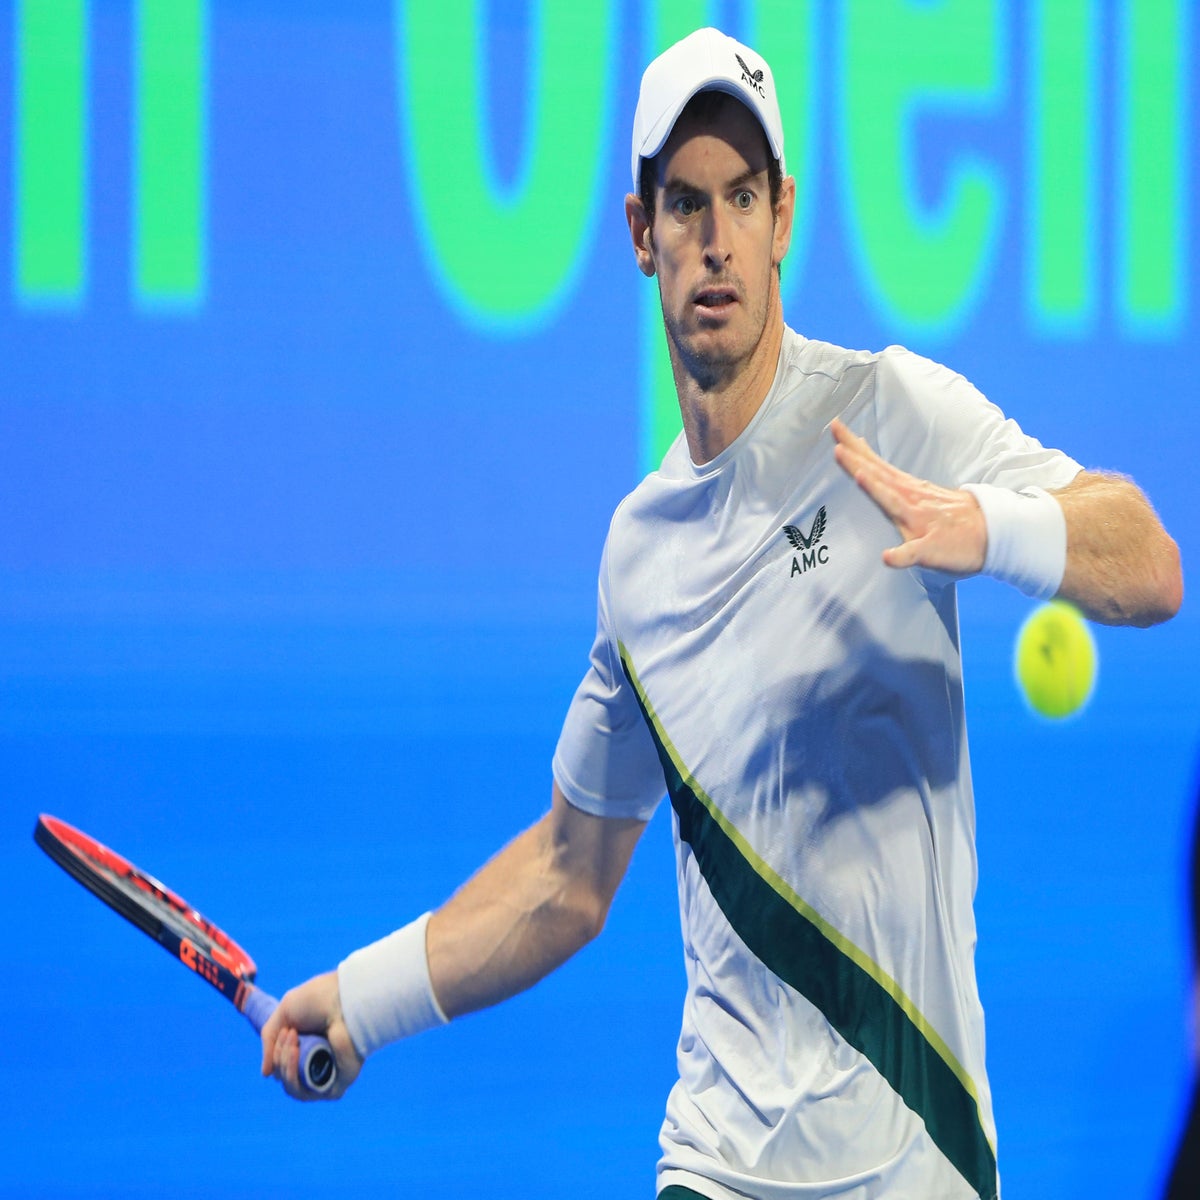 Andy Murray pulls out of Dubai tournament after run to final in